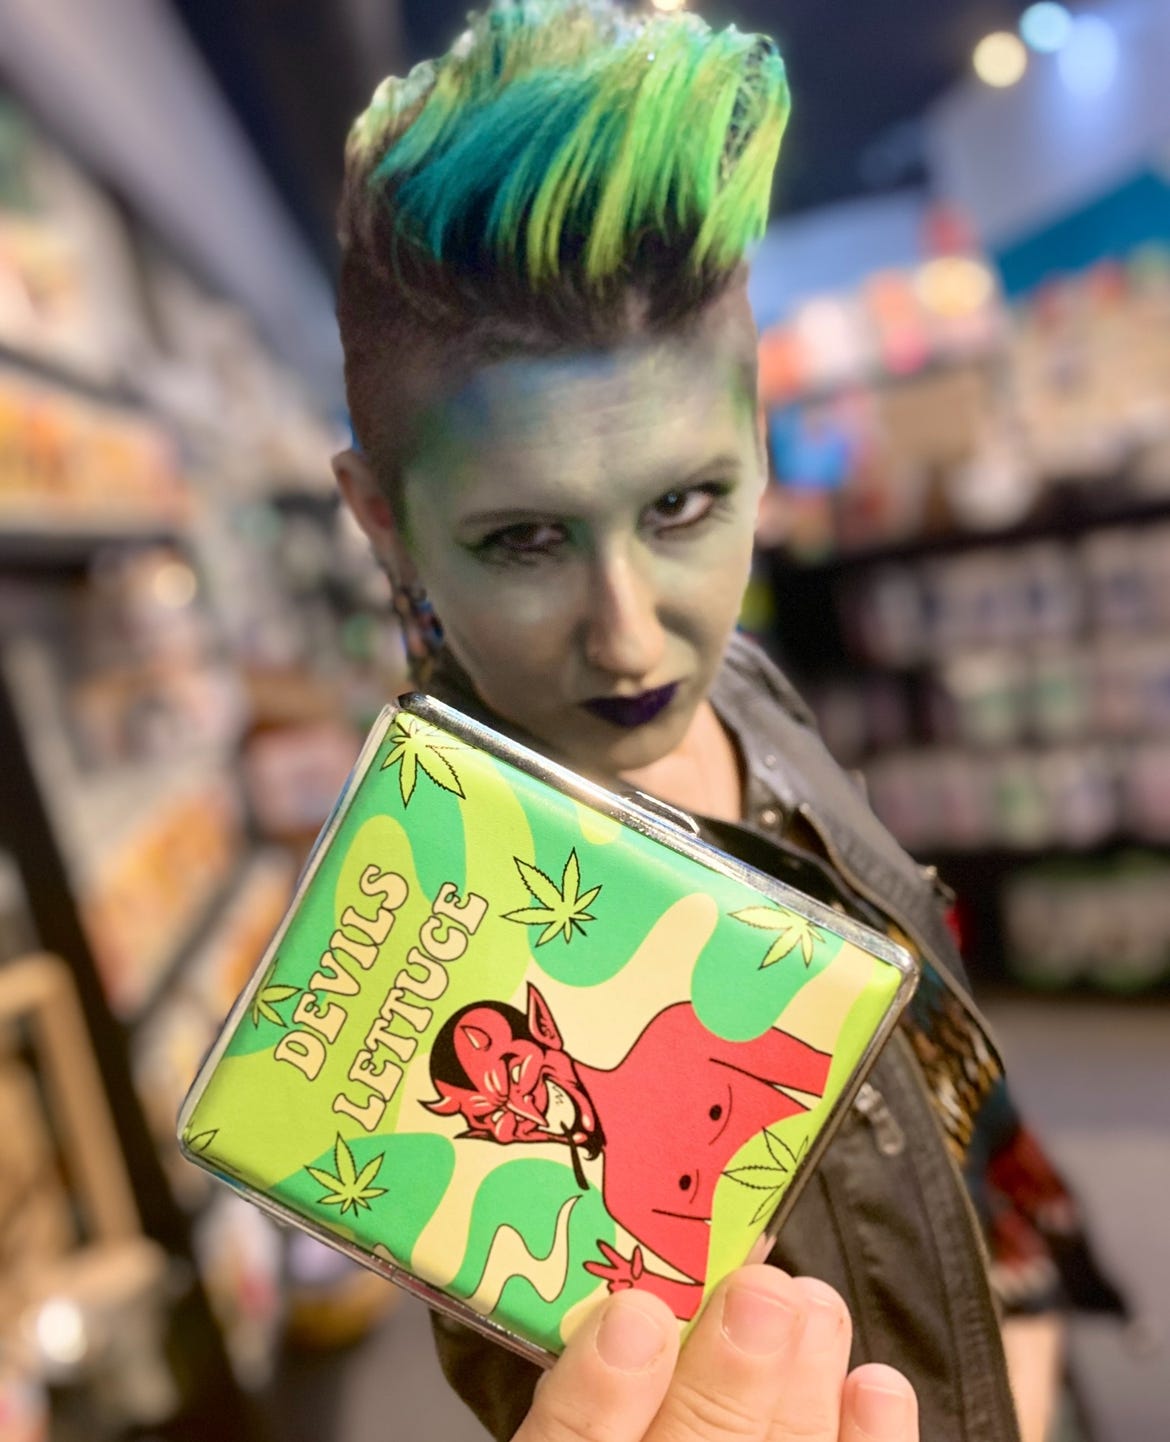 Lyric, a few years ago at Halloween, dressed as a mer-creature, which later became the “weed creature” in their minds after this photo. They stand in a store holding up a wallet that says the Devil’a lettuce on it, with a red devil and green weed leaves. 